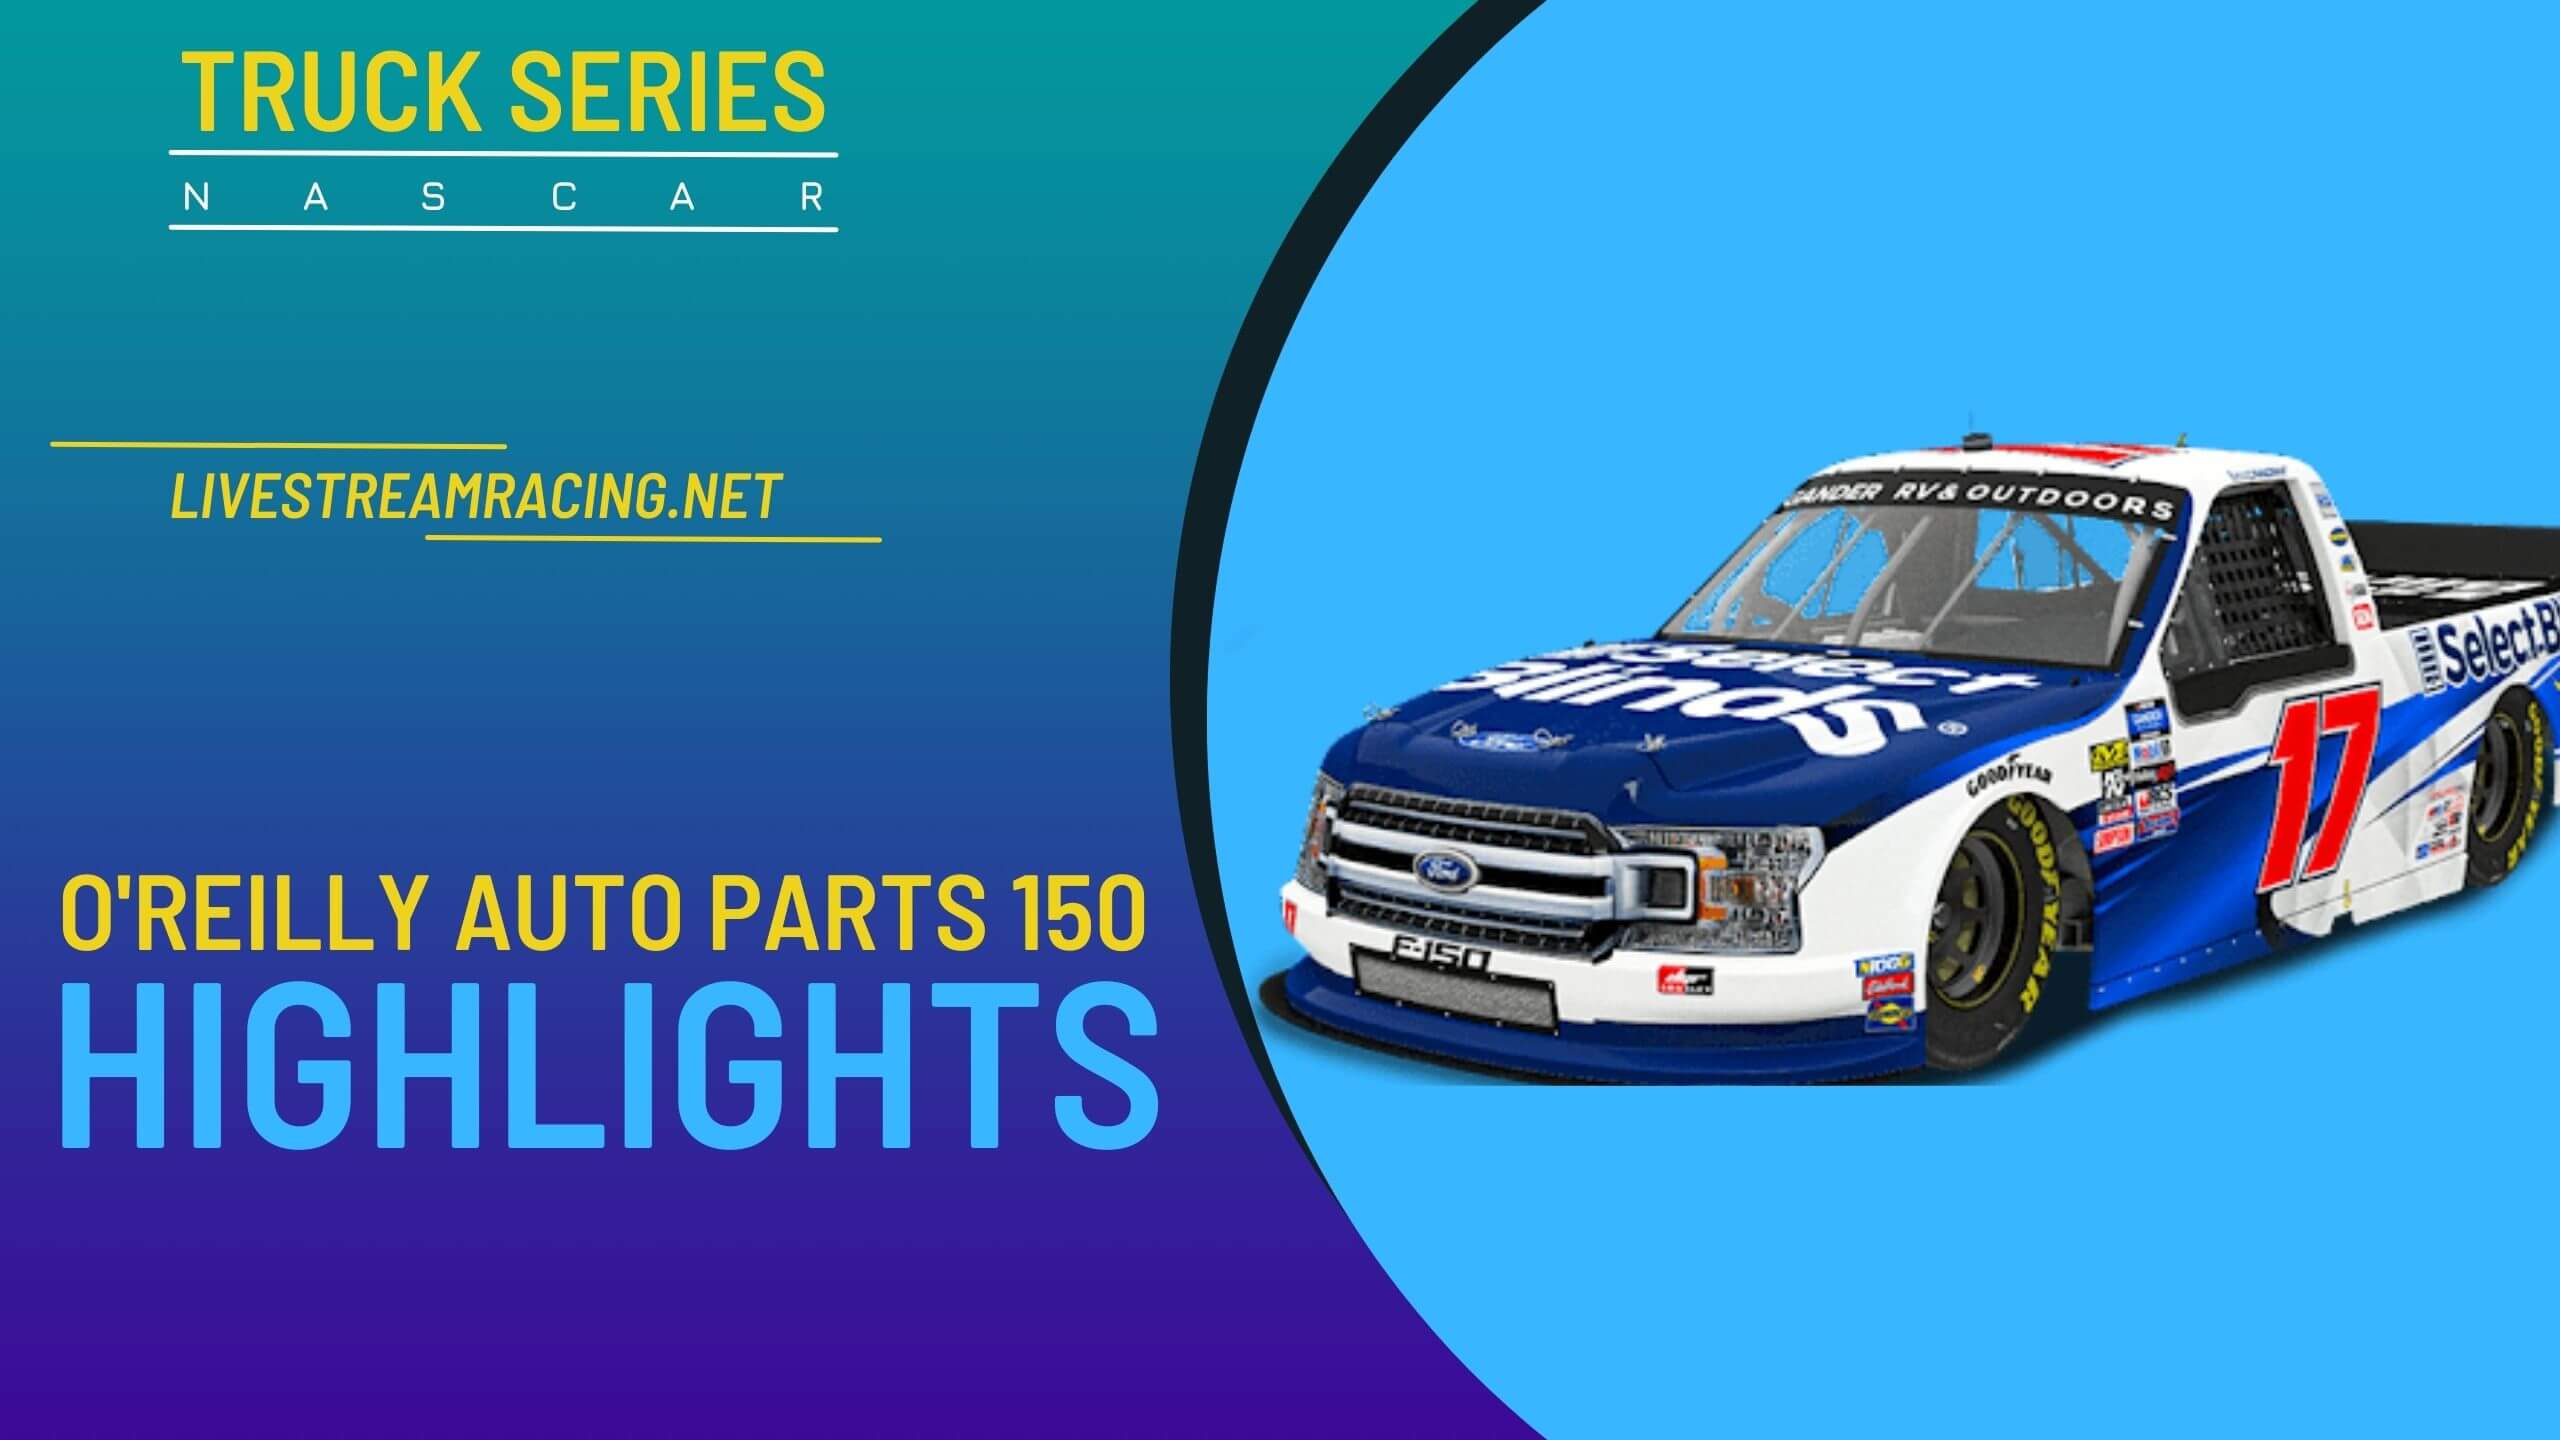 Race At Mid Ohio Nascar Highlights 2022 Truck Series